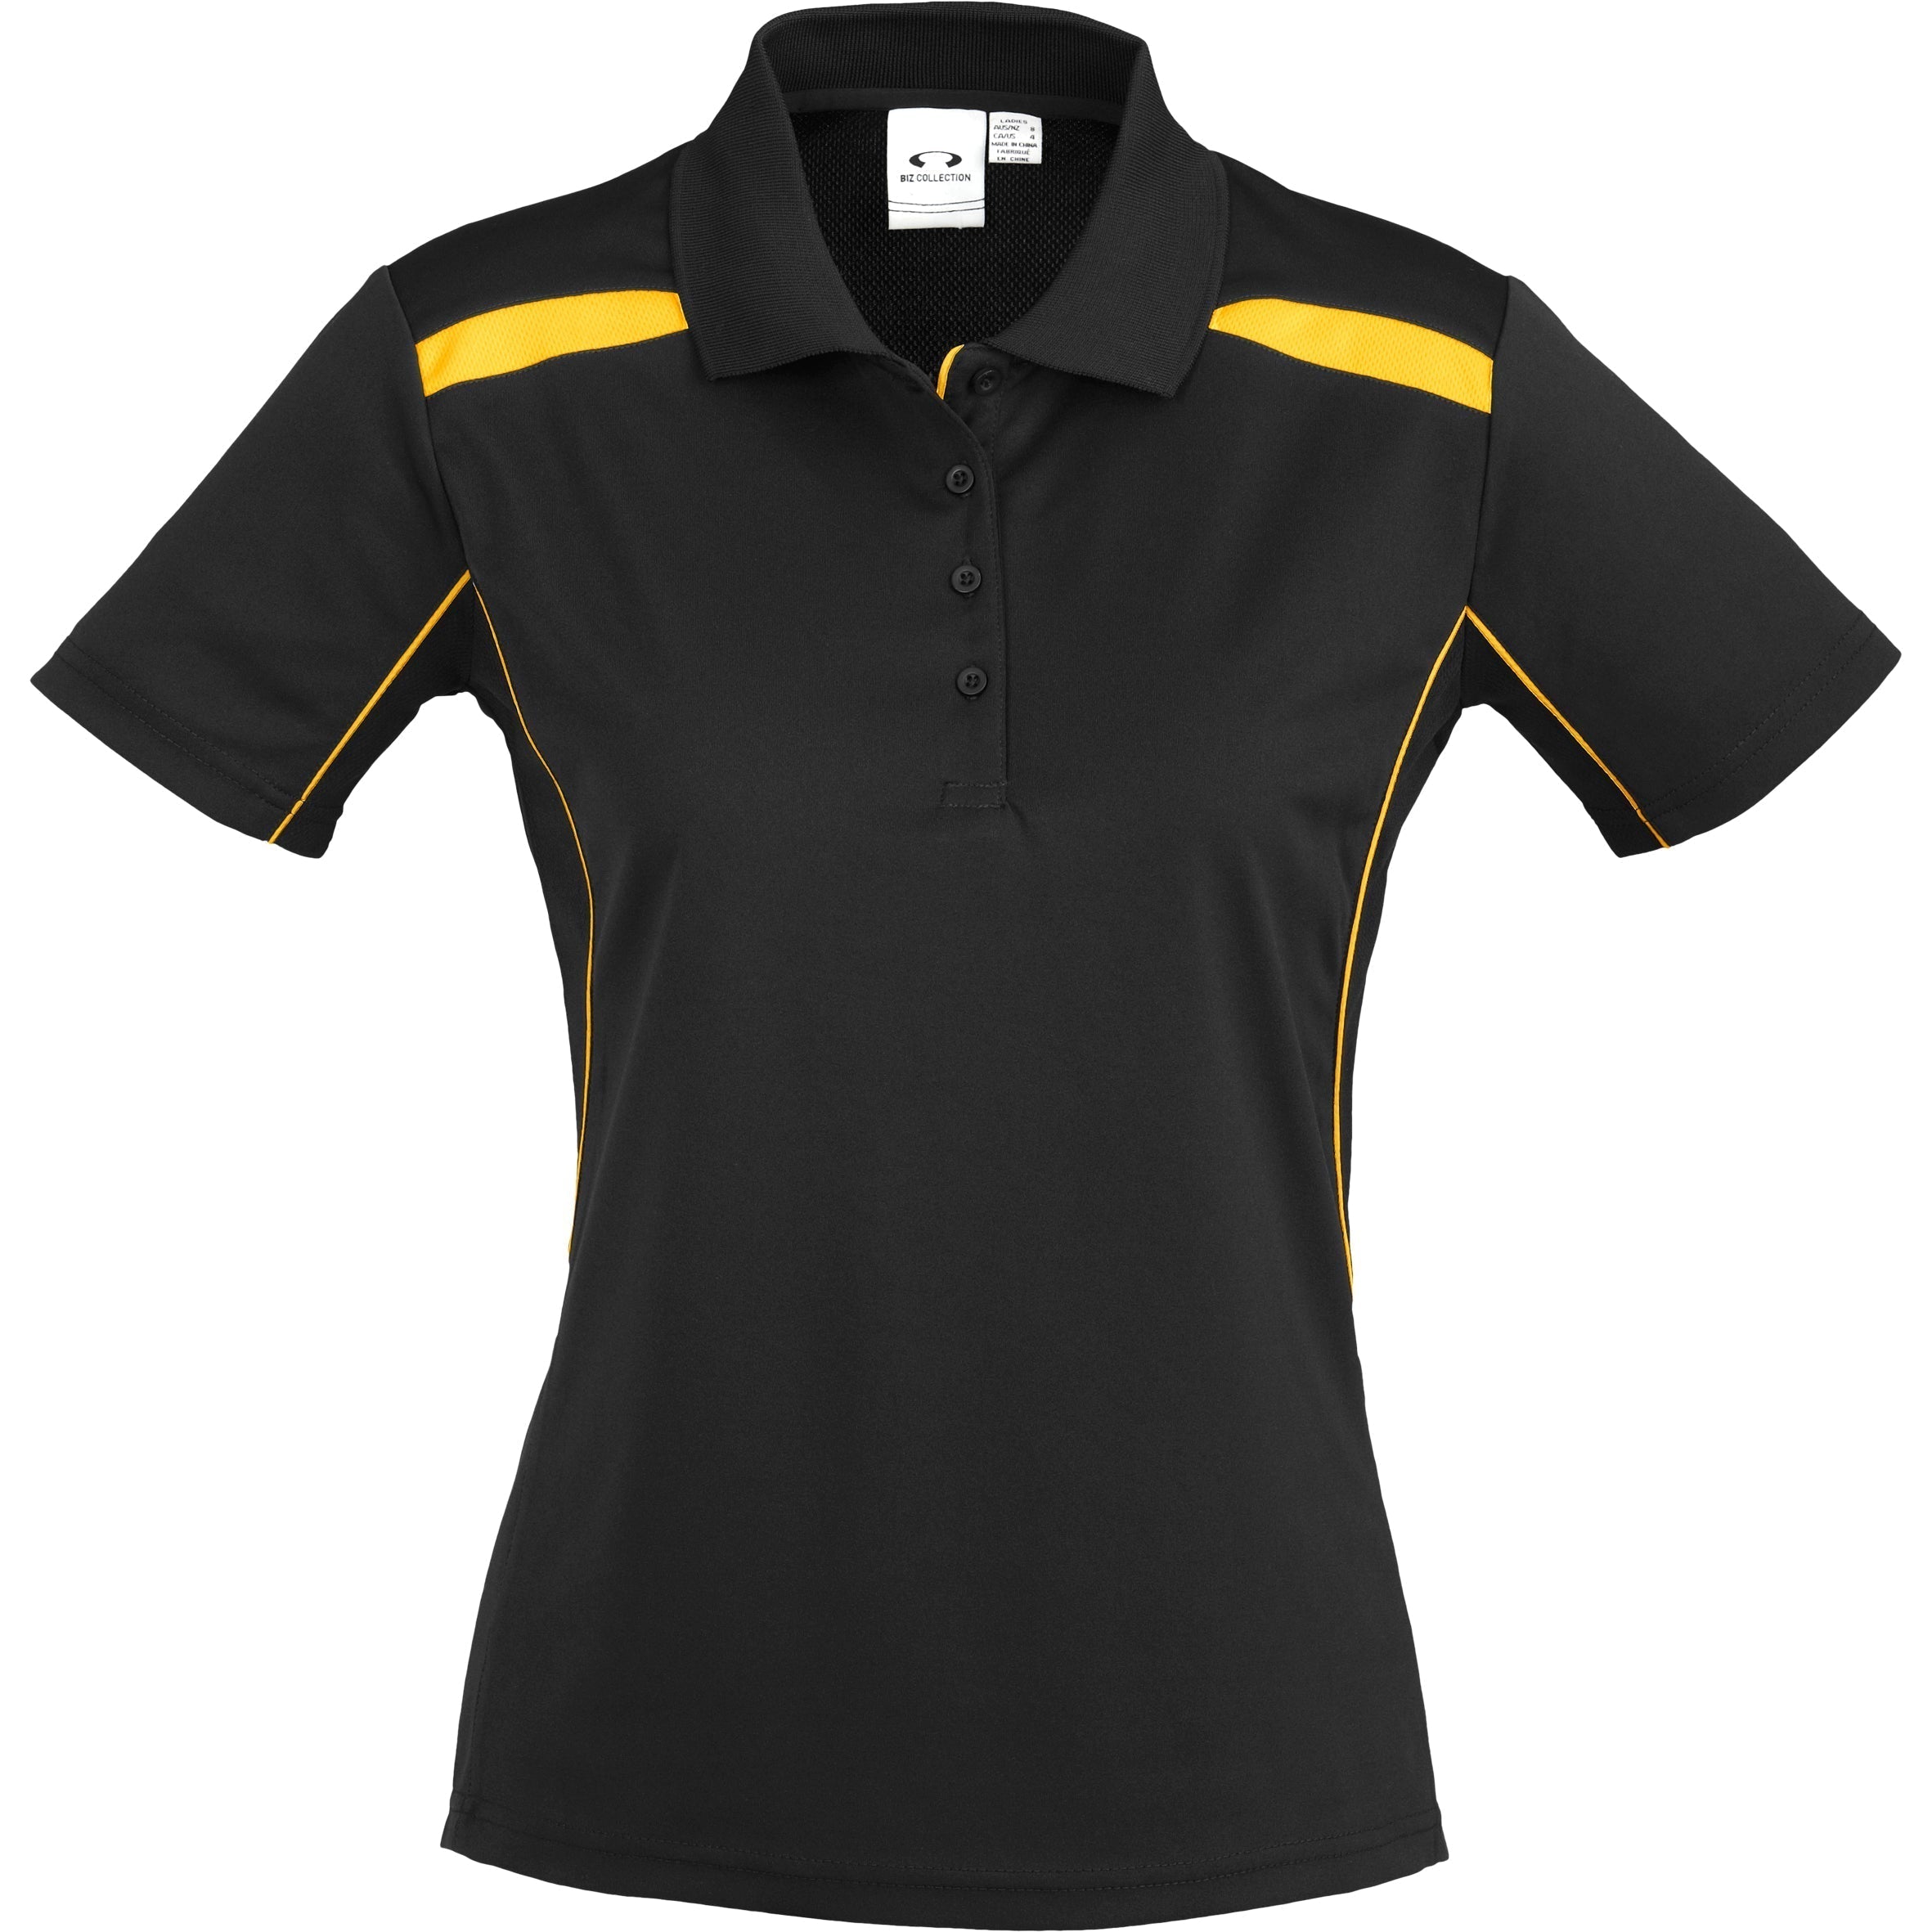 Ladies United Golf Shirt - White Navy Only-L-Black With Yellow-BLY